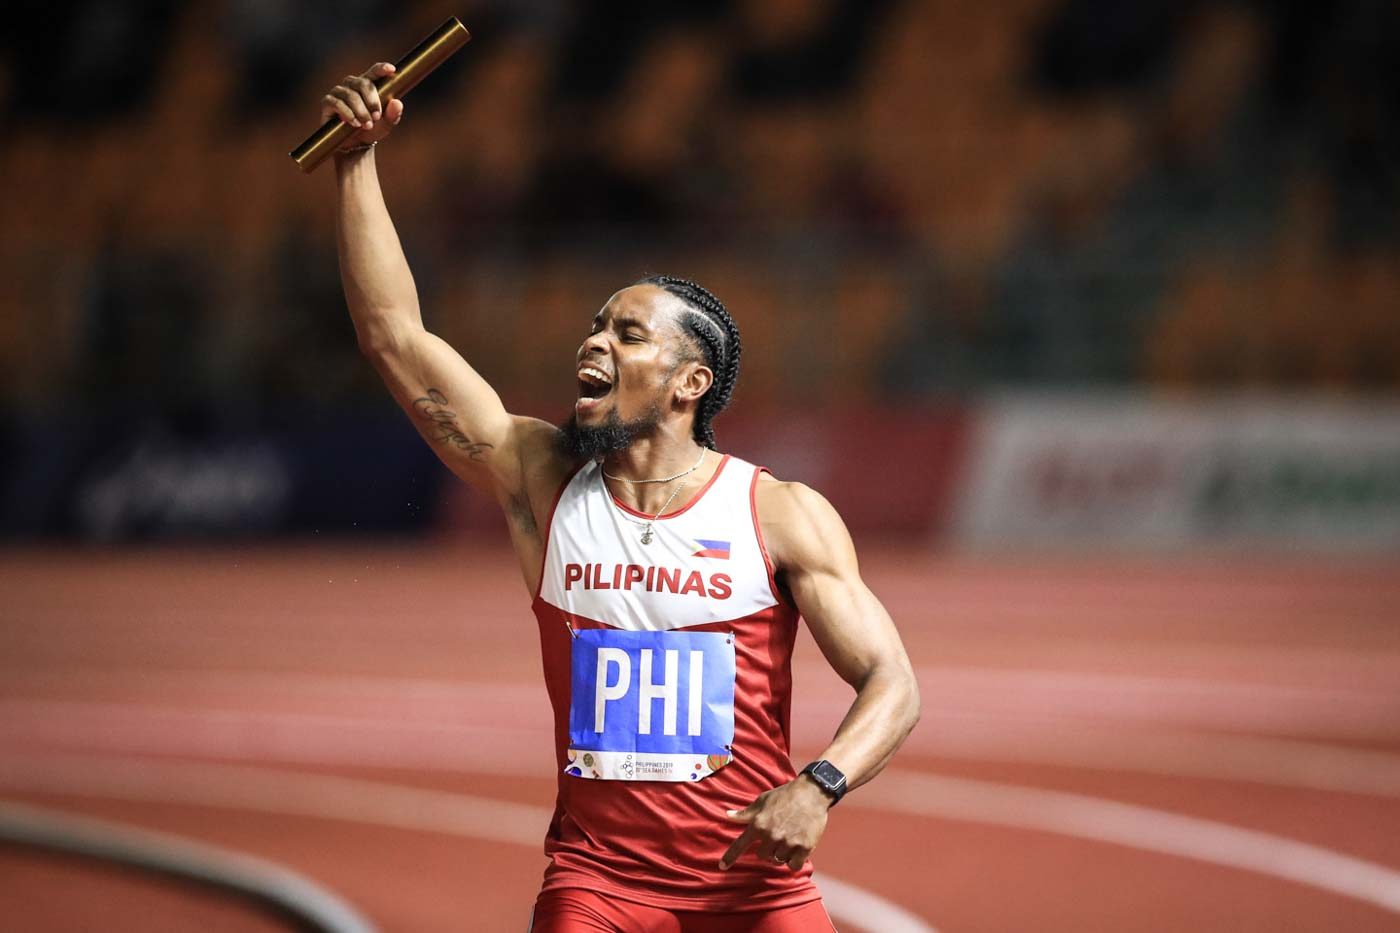 After disqualification, Eric Cray leads PH to relay gold